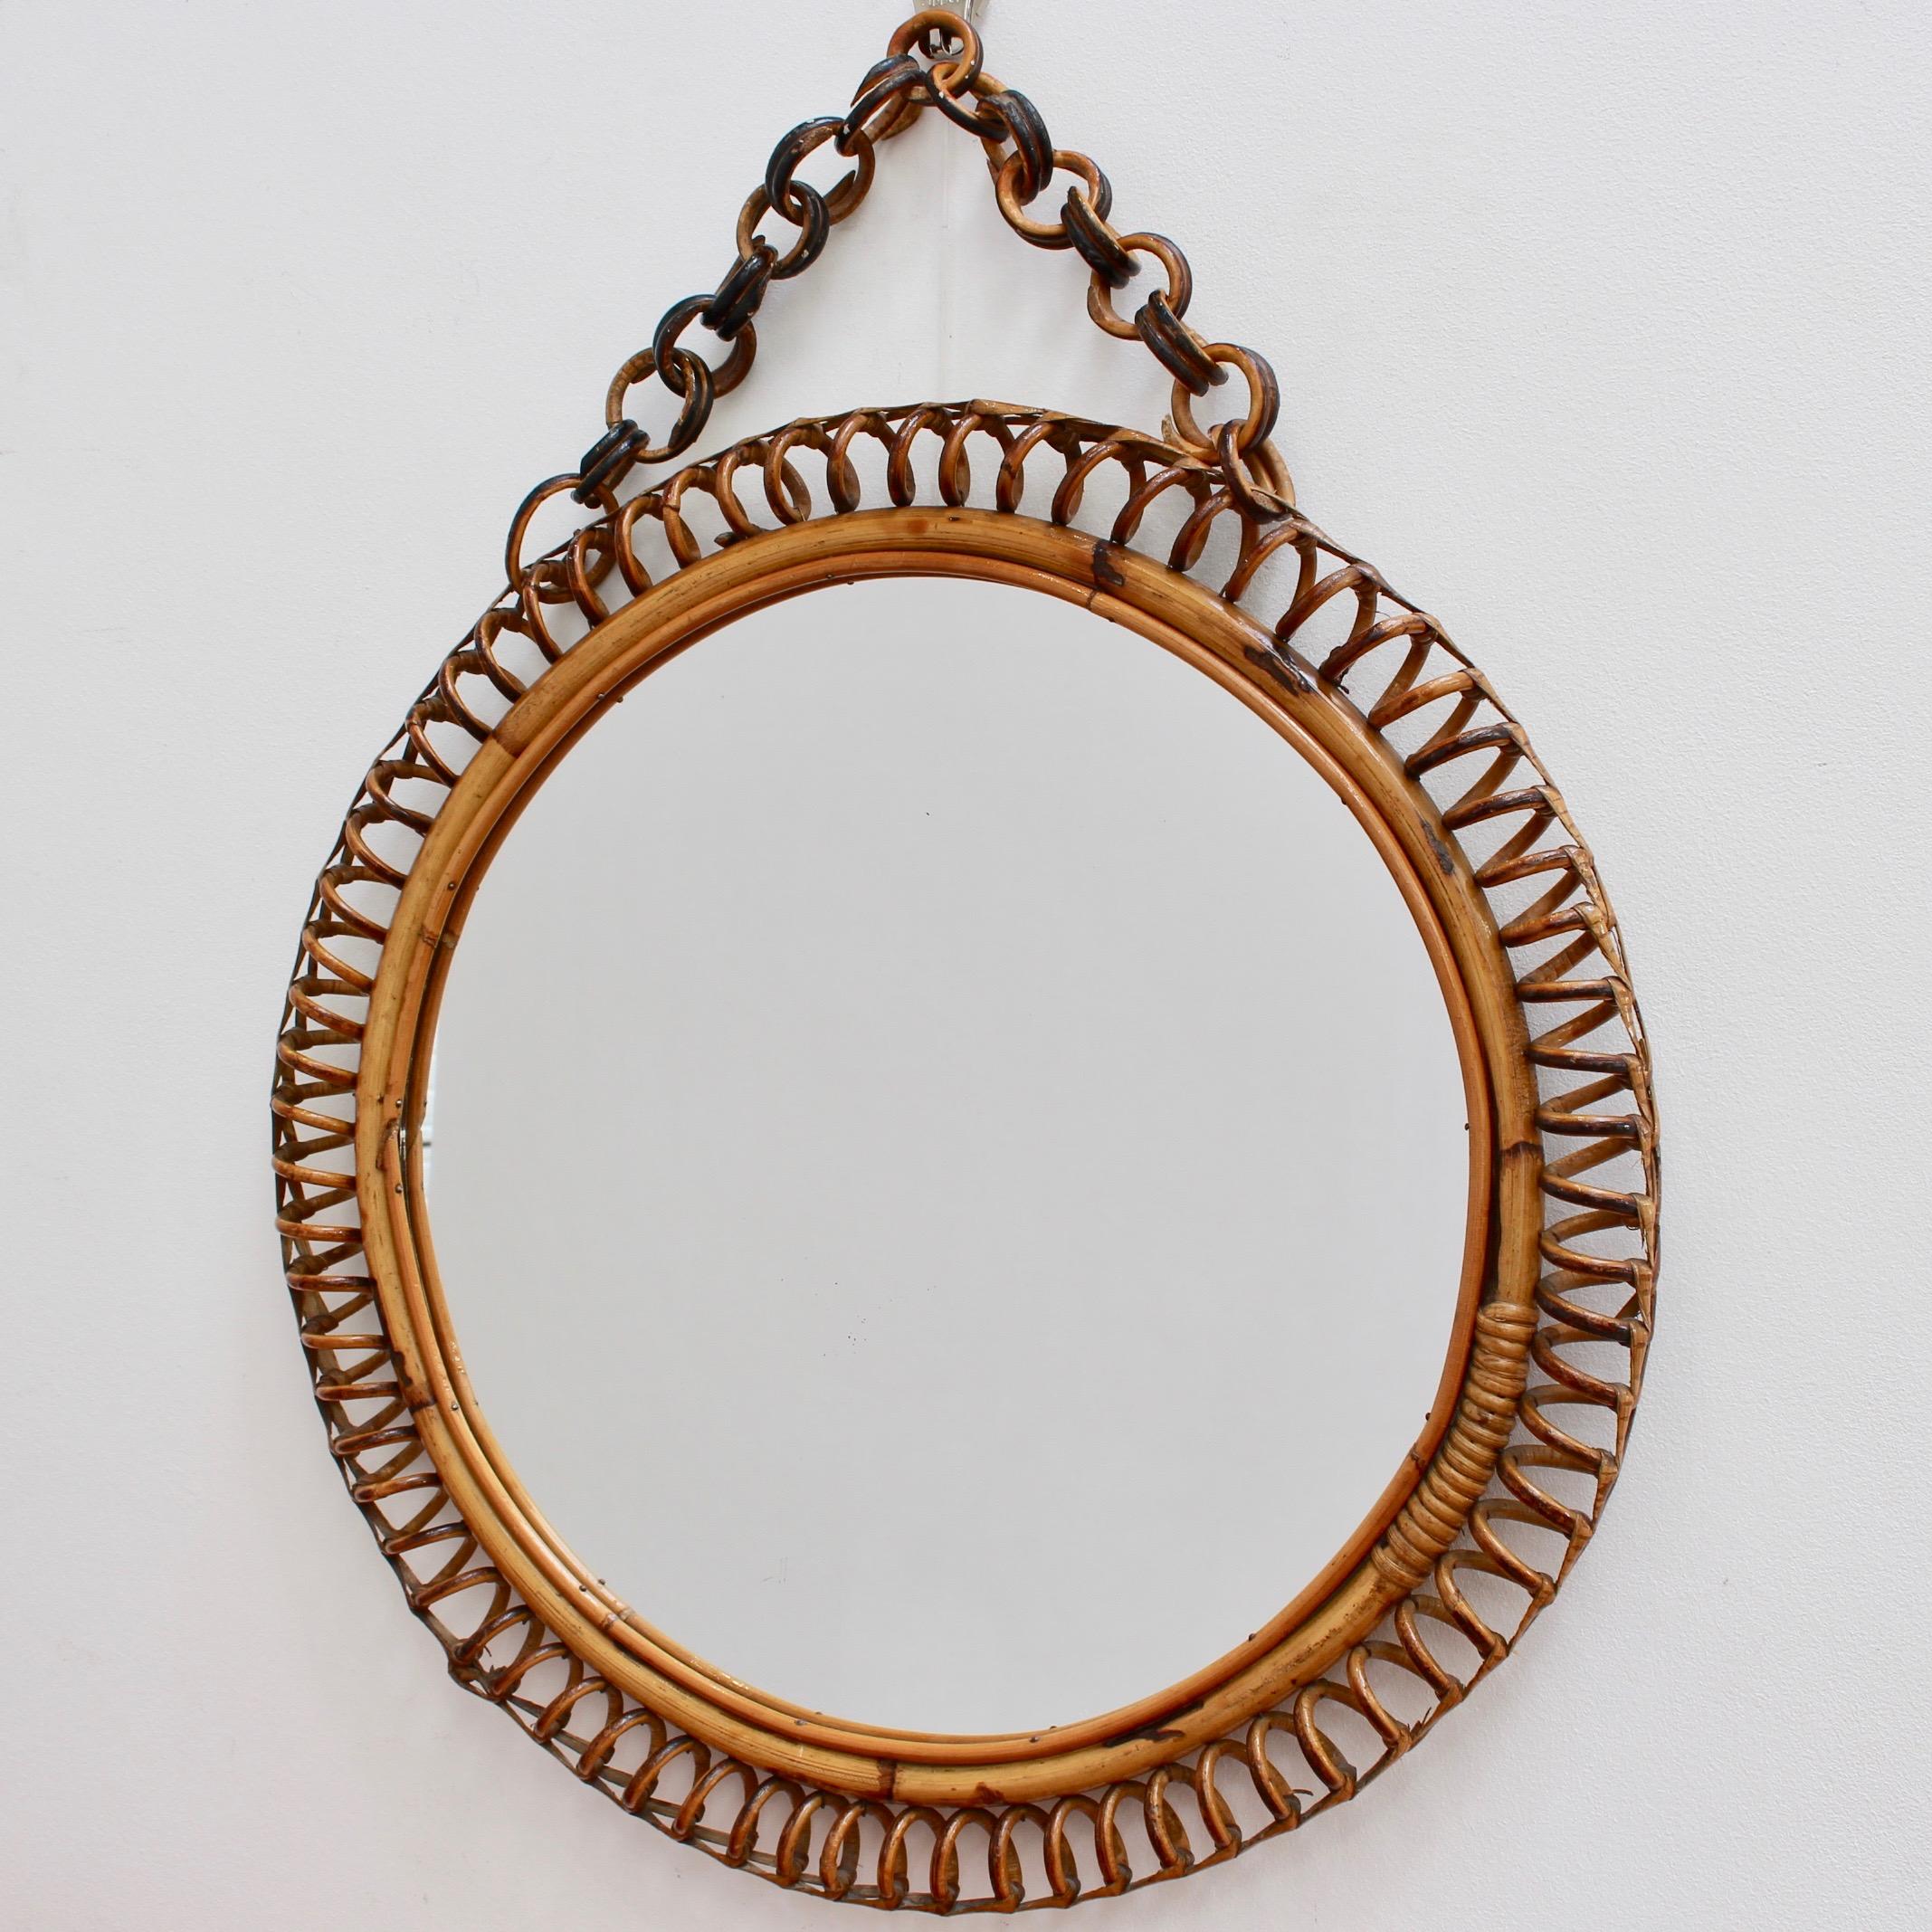 Italian circular-shaped rattan wall mirror (circa 1960s). This mirror has a very charming Classic shape with rattan spirals framing the mirror. The rattan hanging chain adds further allure. There is a characterful, aged patina on the mirror frame